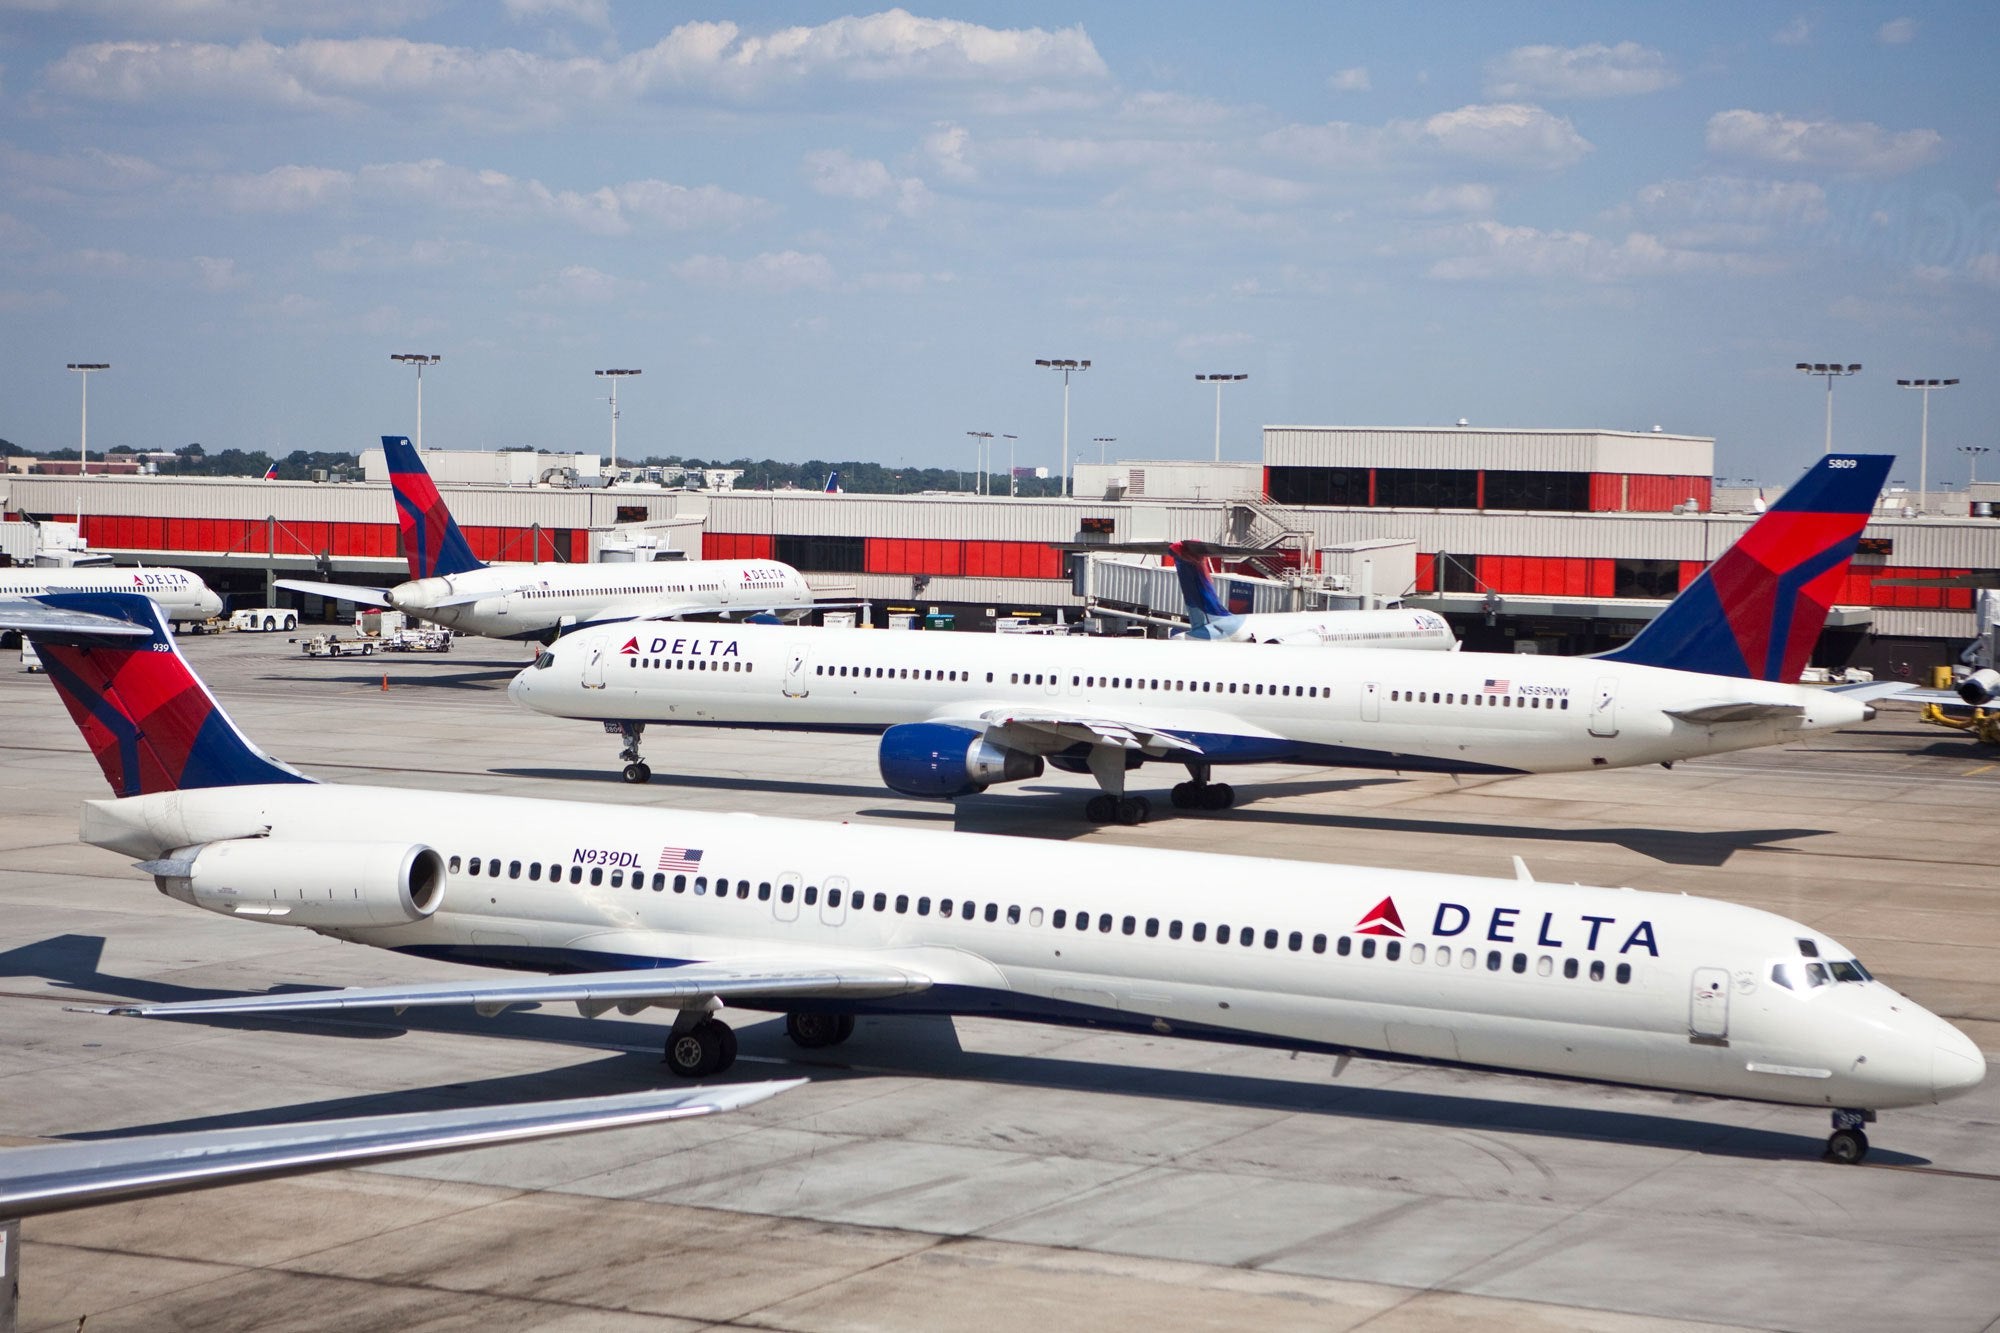 Milwaukee Man Gets Kicked Off Delta Flight After Getting Up To Use The Restroom
